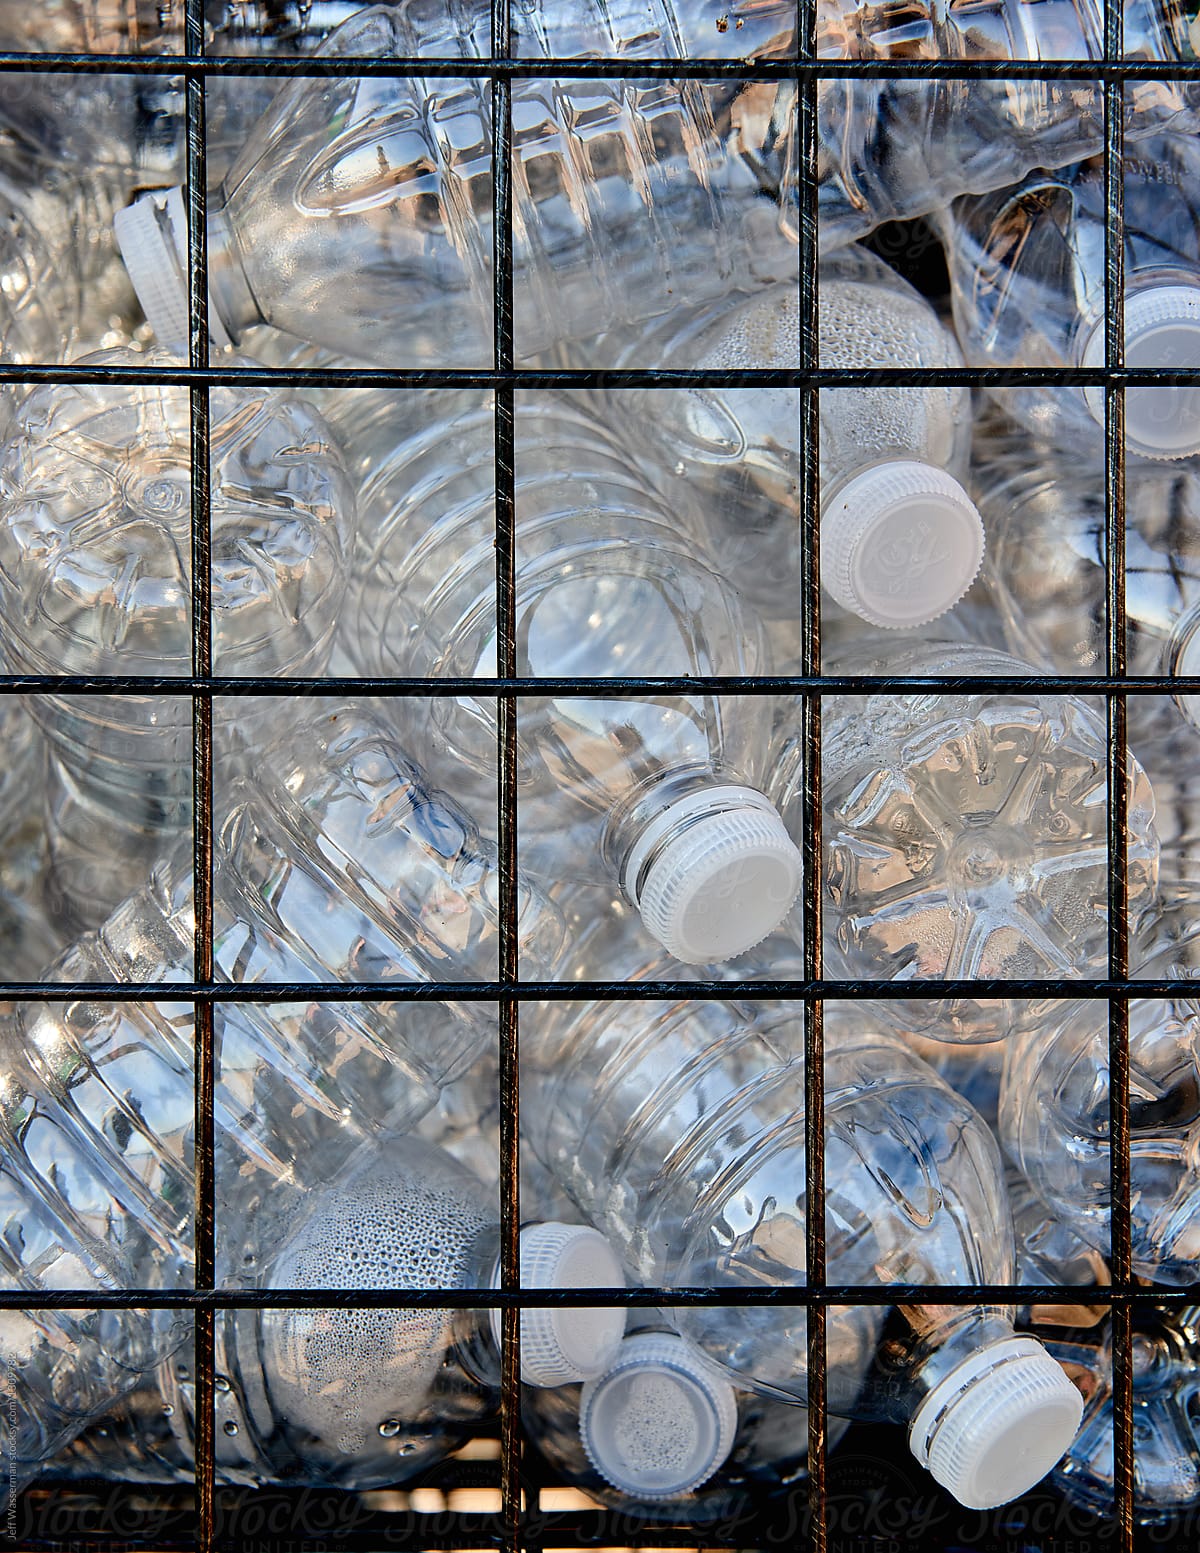 Plastic Water Bottles with Caps Ready for Recycling